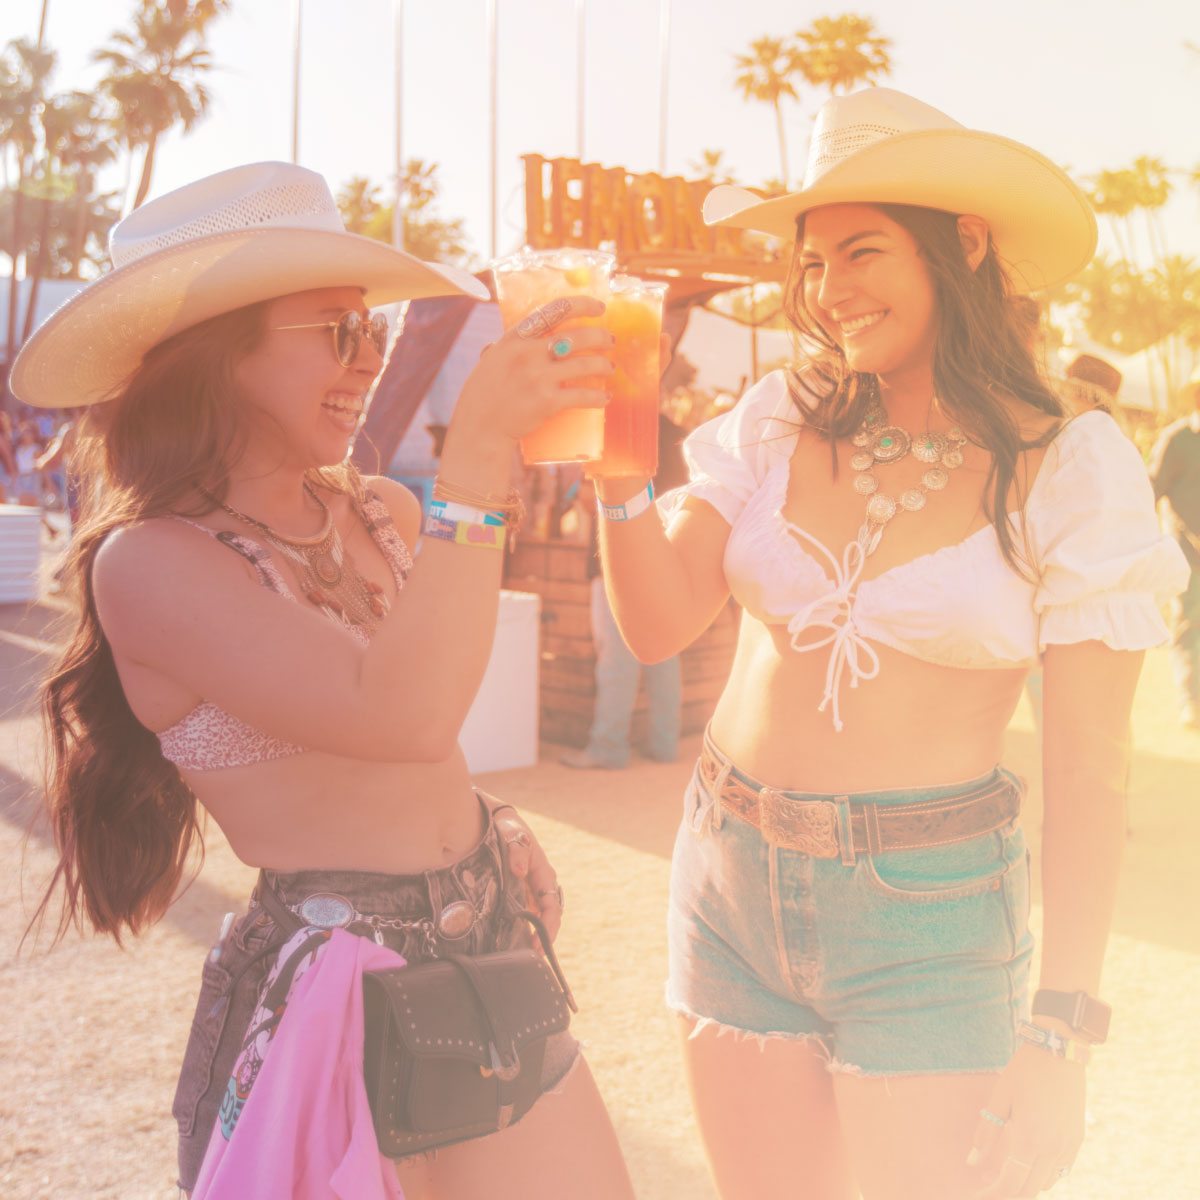 Women drinking at Stagecoach photo